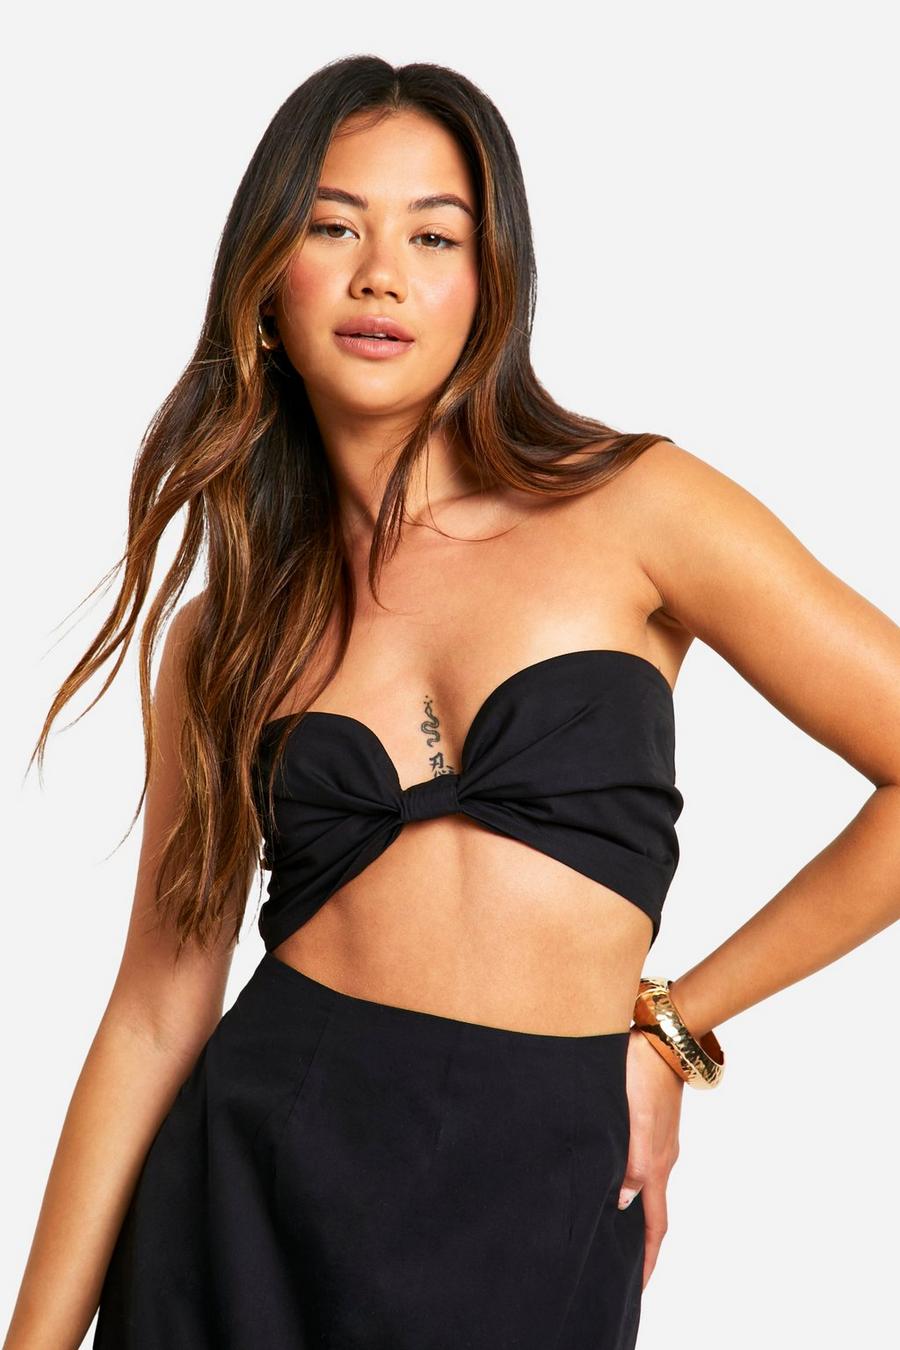 Black Knotted Crop Top